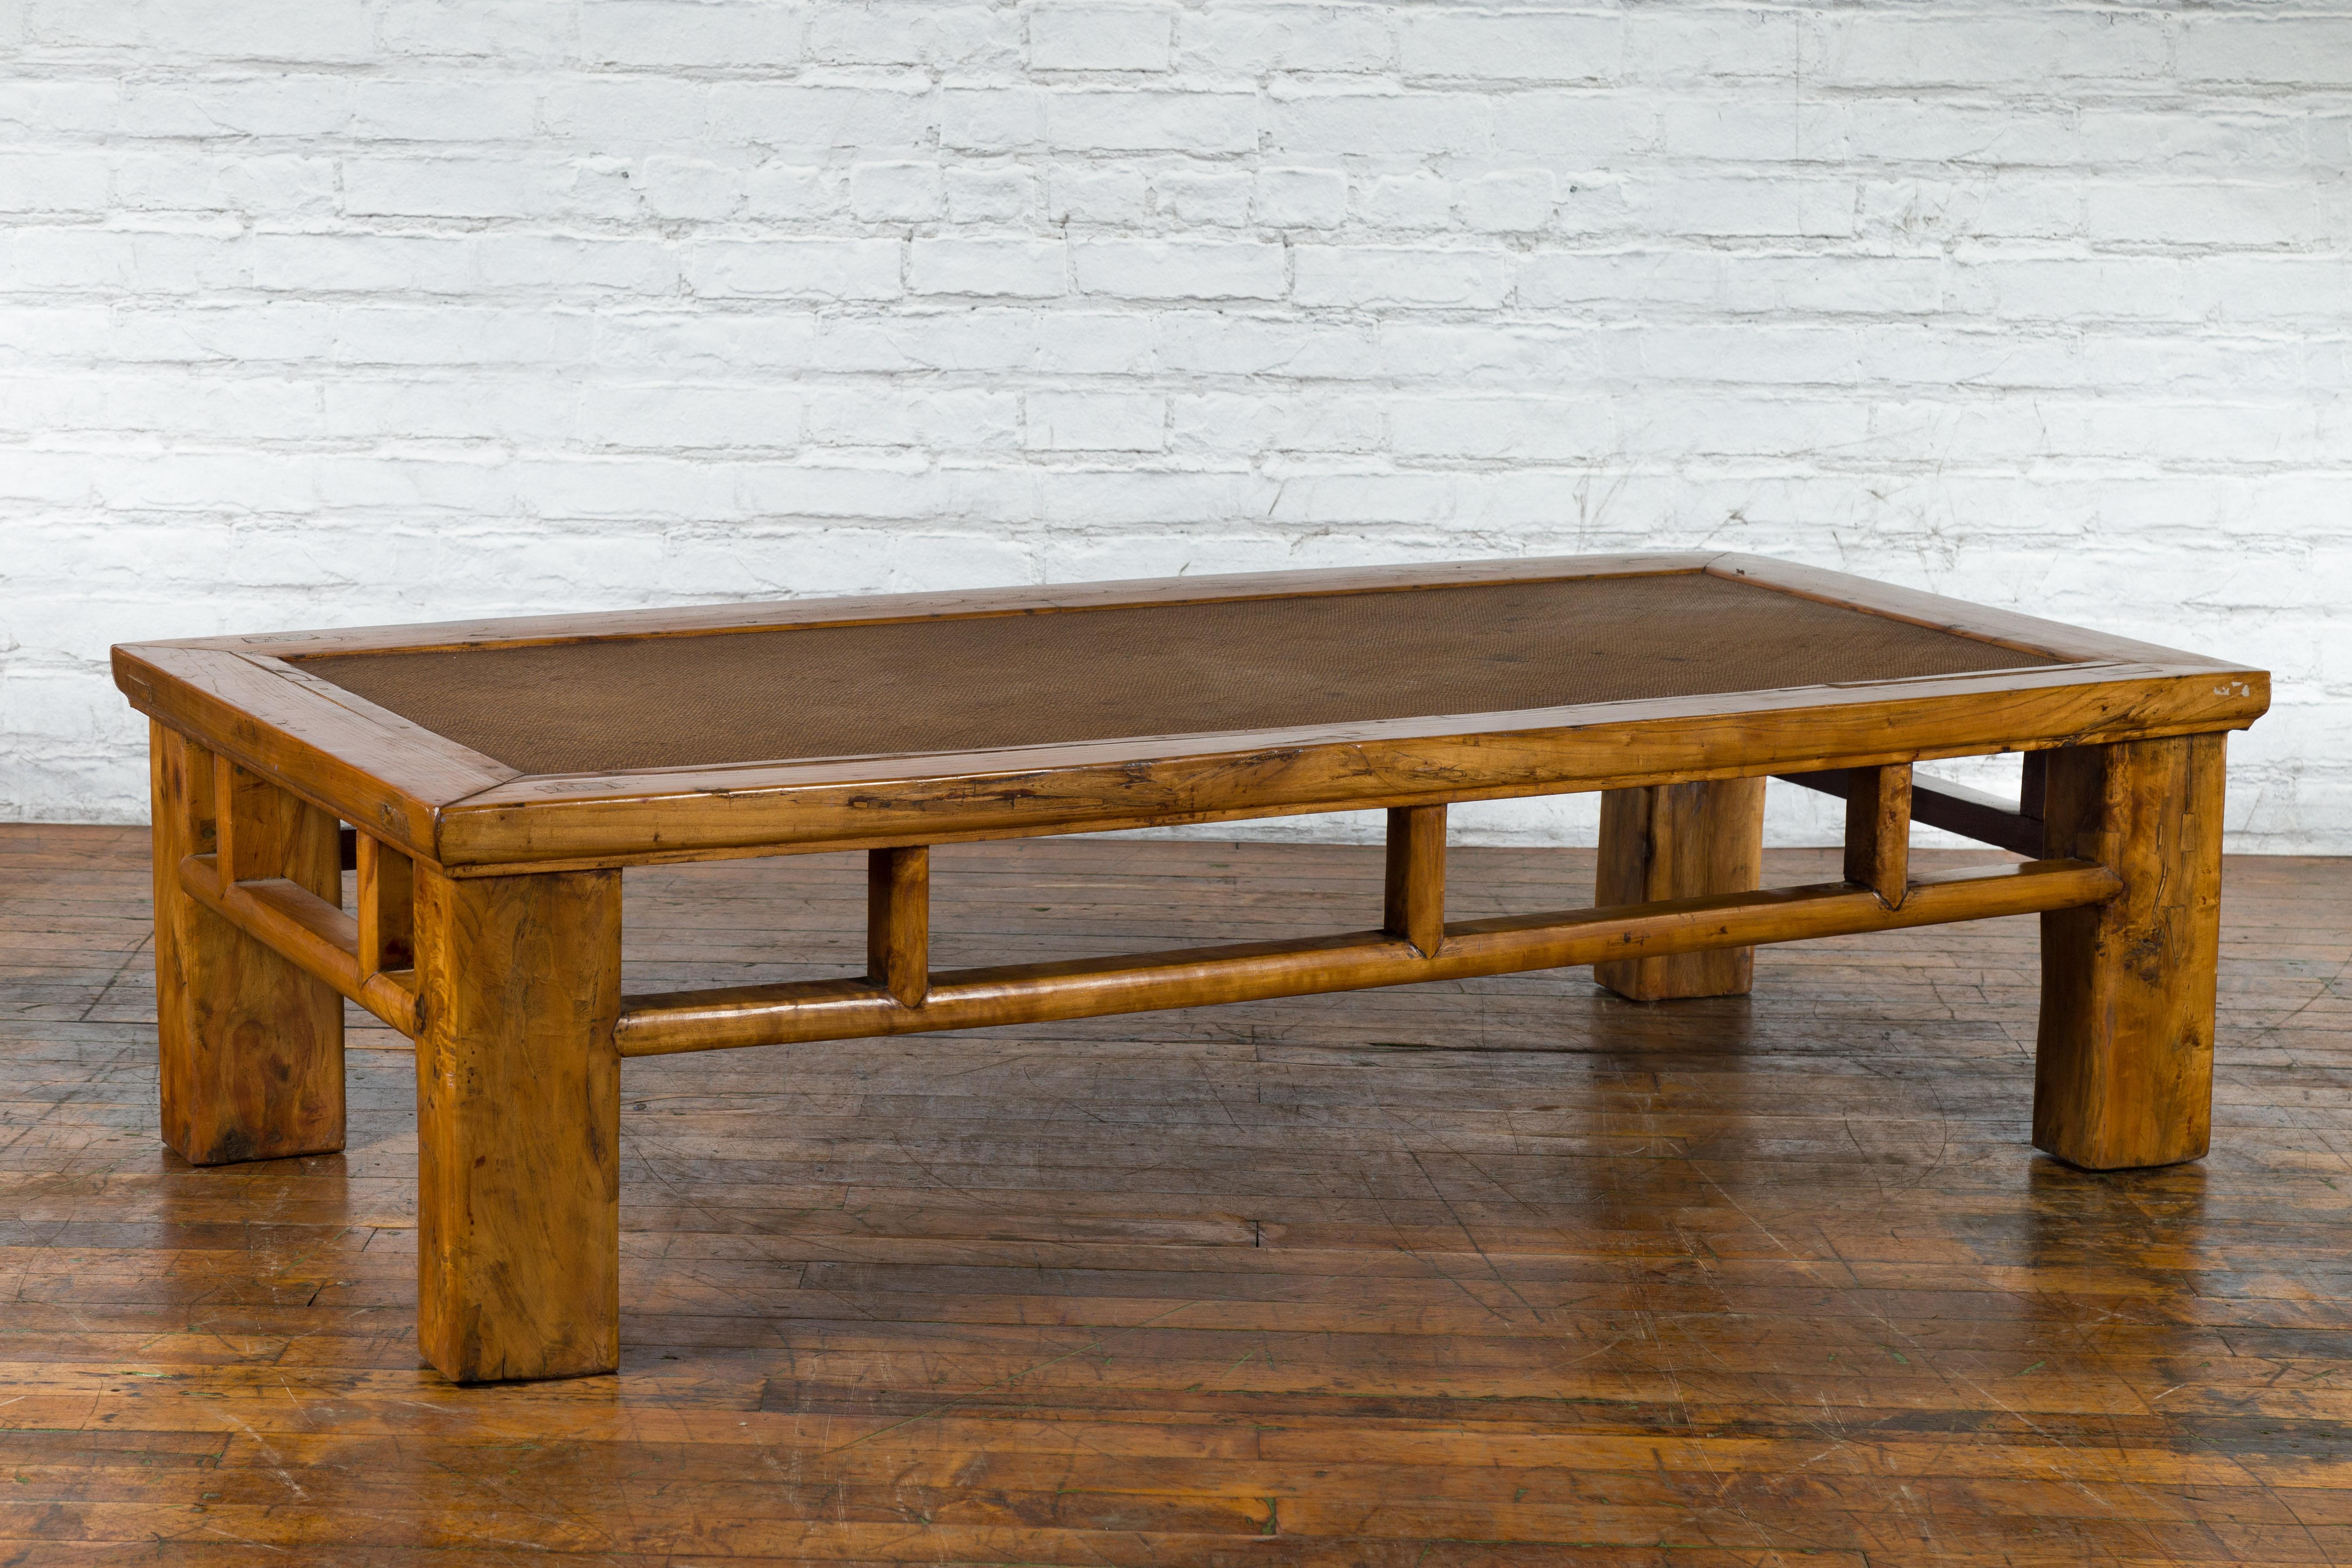 An antique Chinese Qing Dynasty period elm wood coffee table from the early 20th century, with hand-woven rattan top inset, square legs, open apron and pillar strut motifs. Created in China during the late Qing Dynasty period, this coffee table was